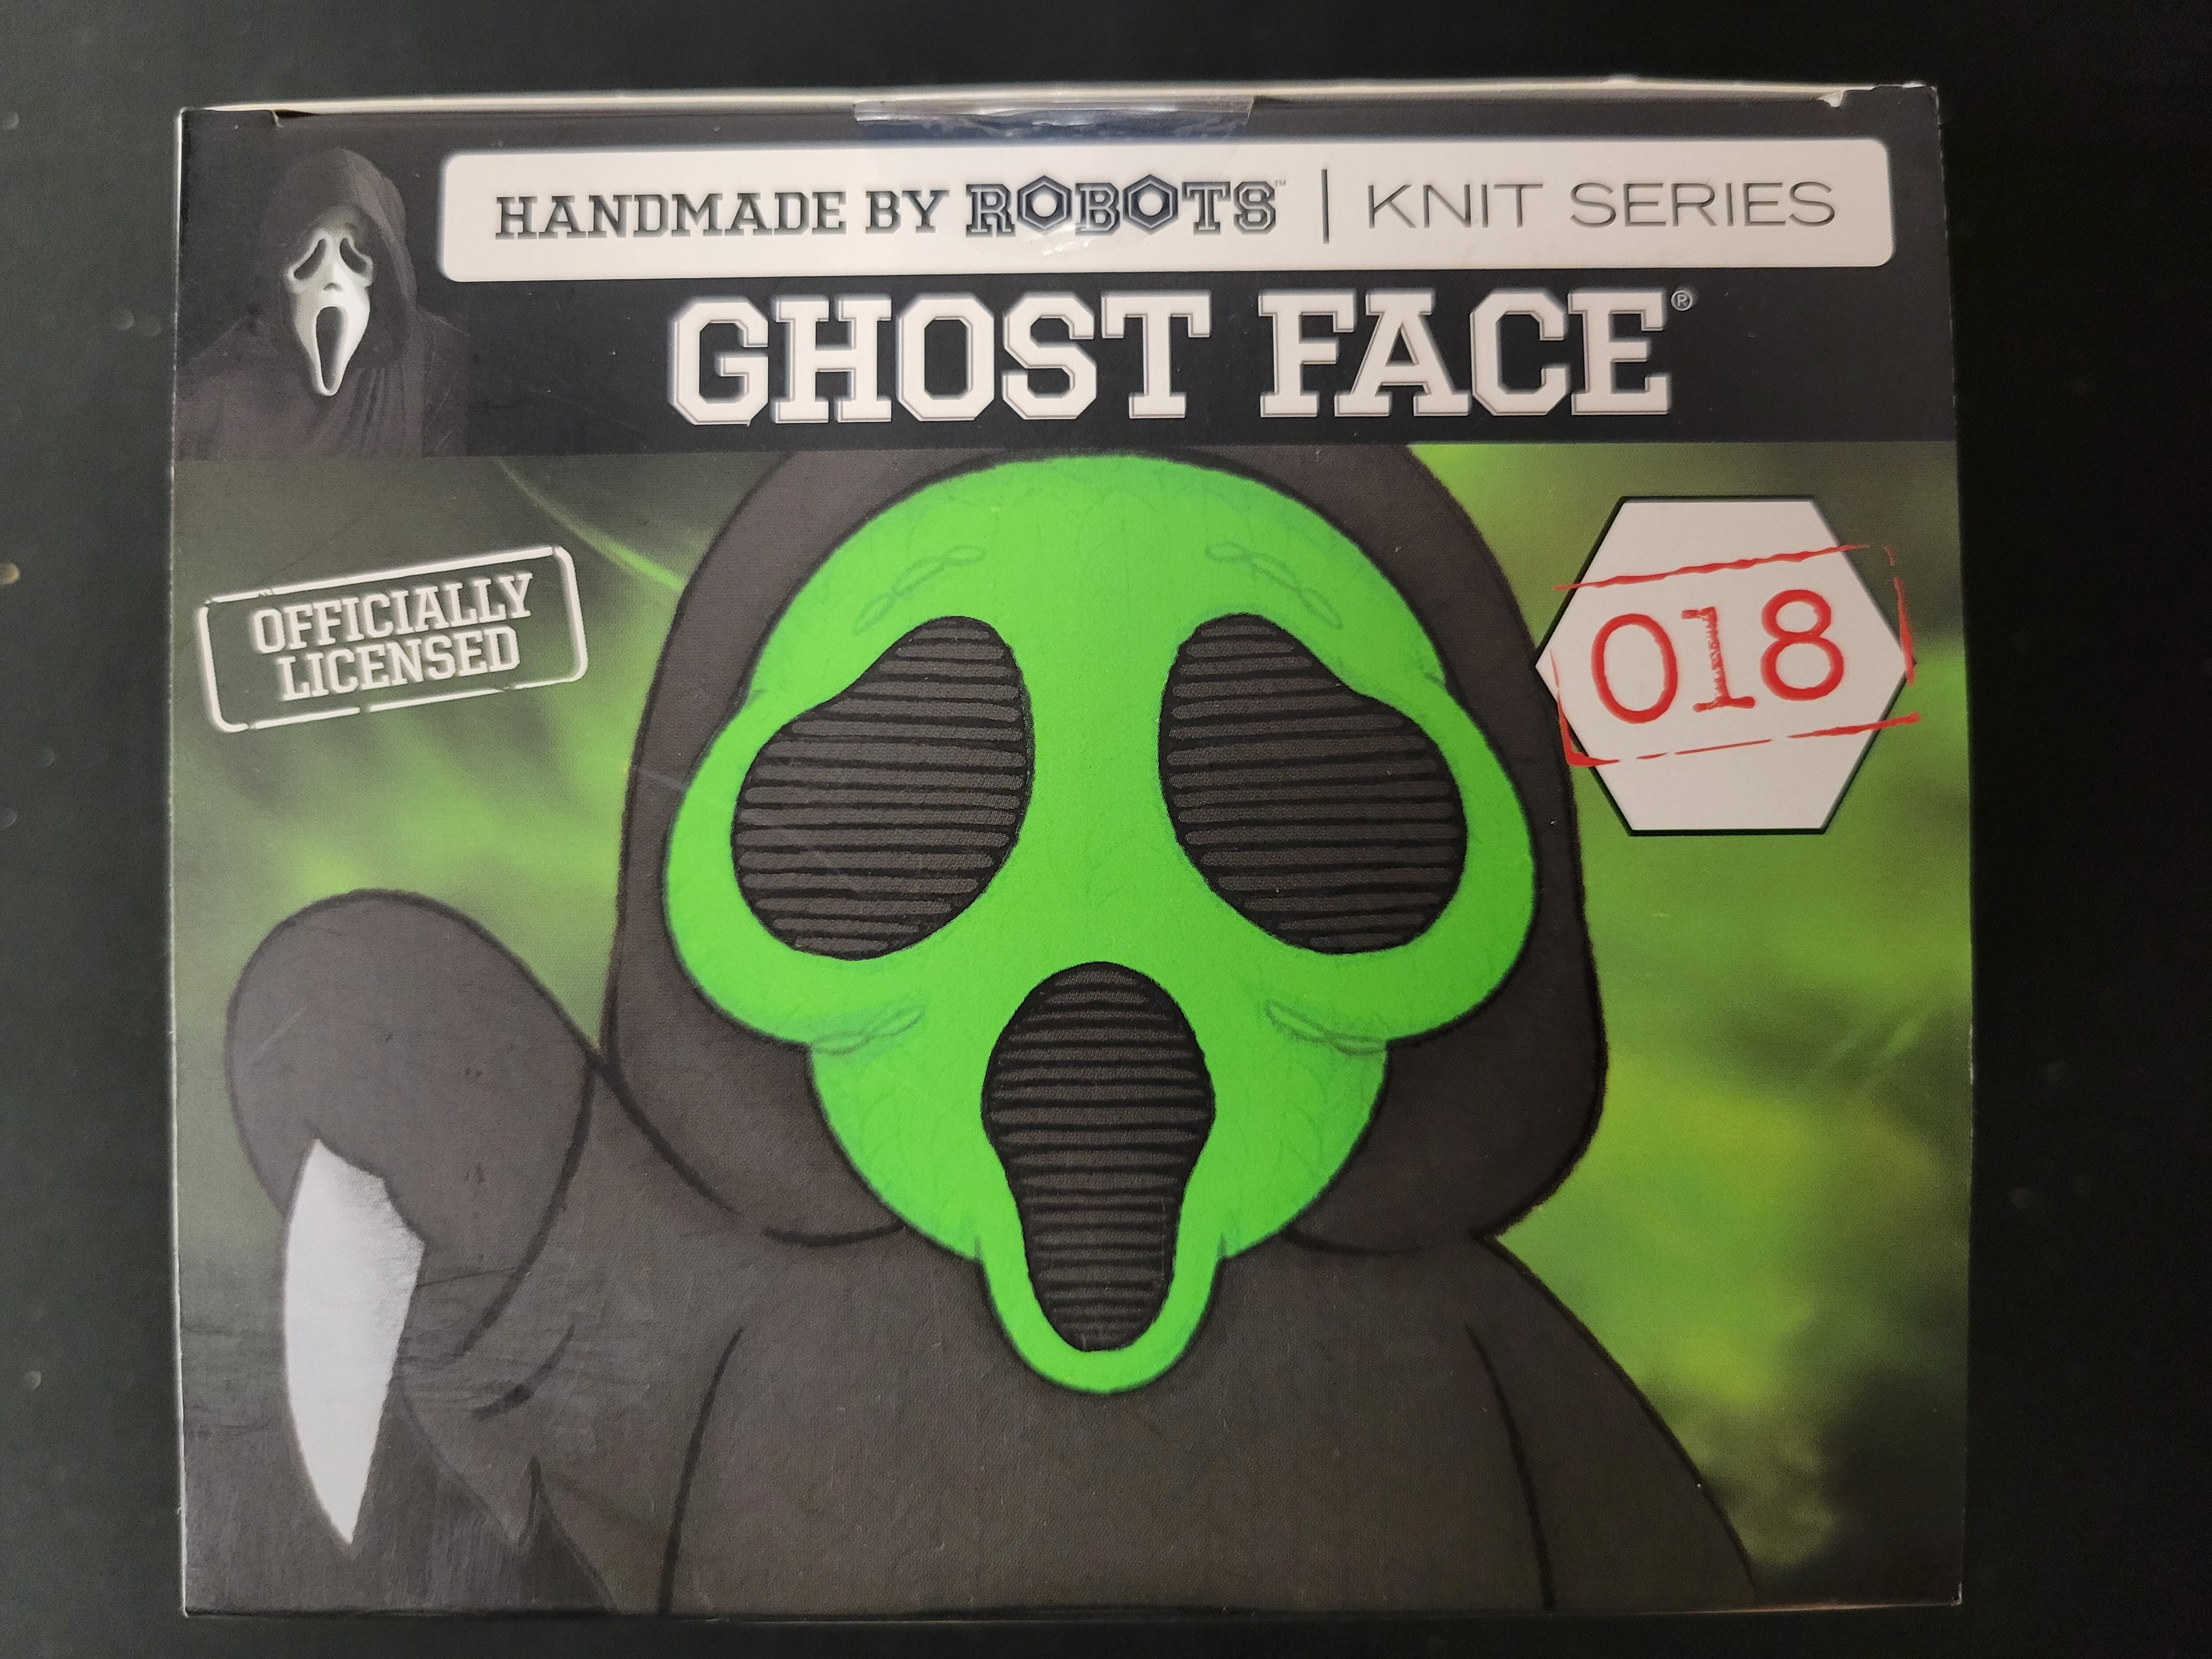 Handmade By Robots Ghost Face Autographed By Rose McGowan - JSA Certified 698